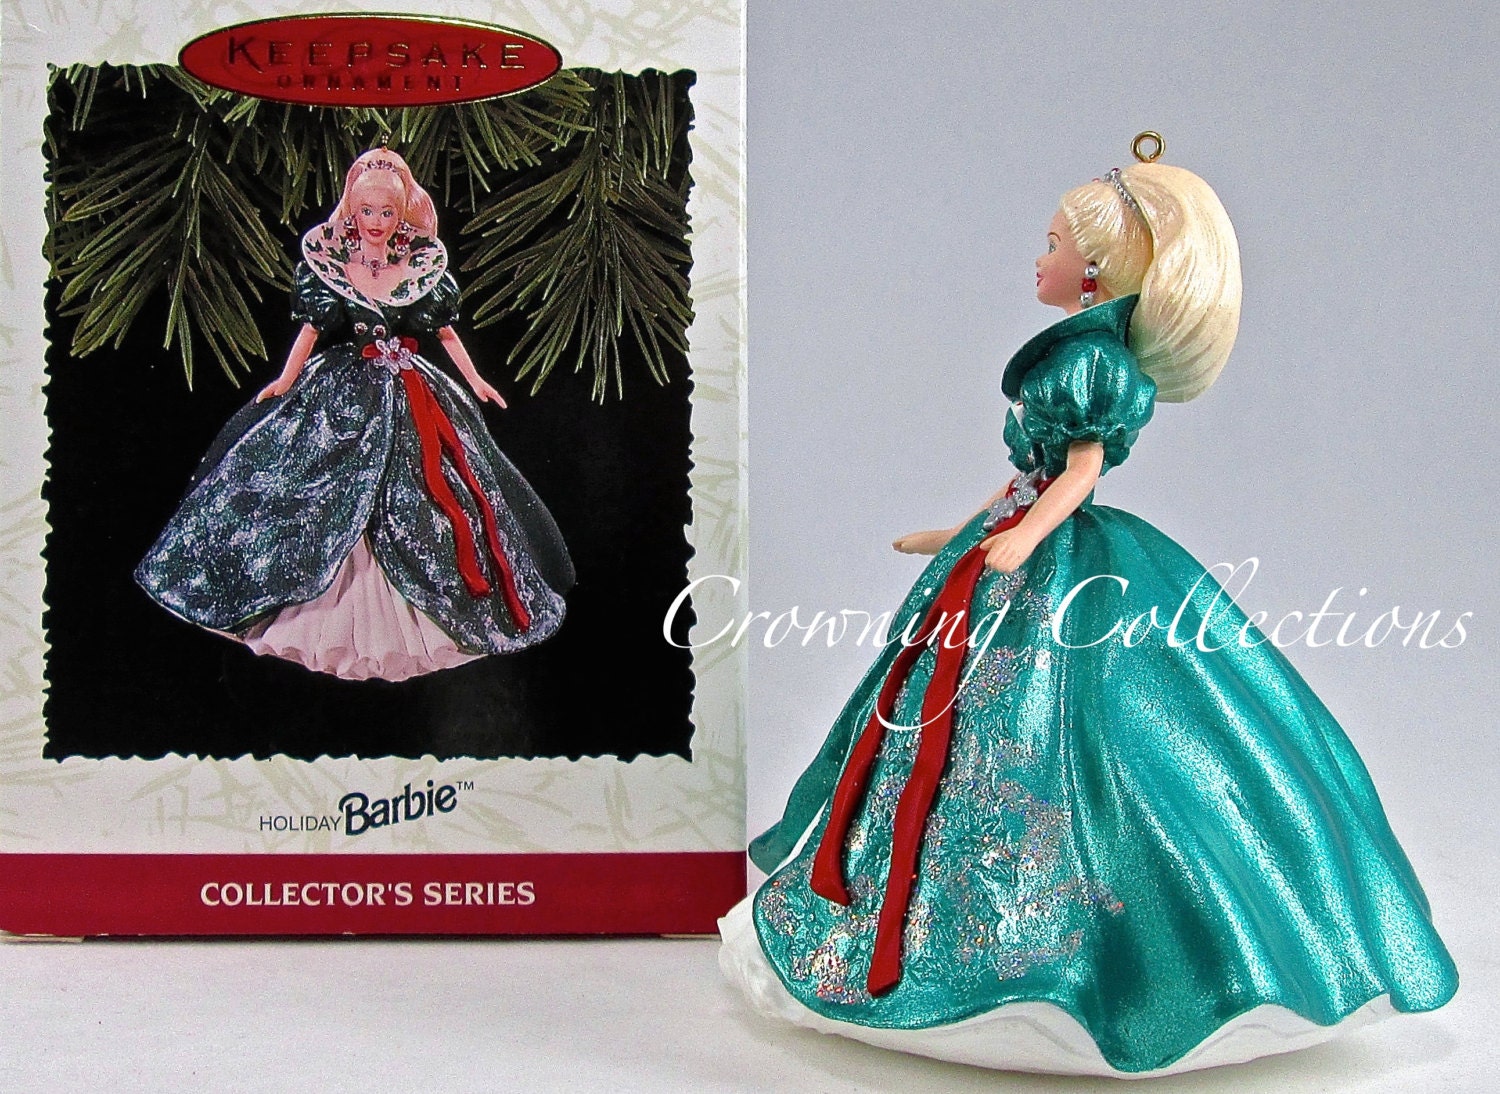 COLLECTIBLE Lot of 12 Hallmark Barbie Holiday Pins on Display Cards 1995 $2/ea 